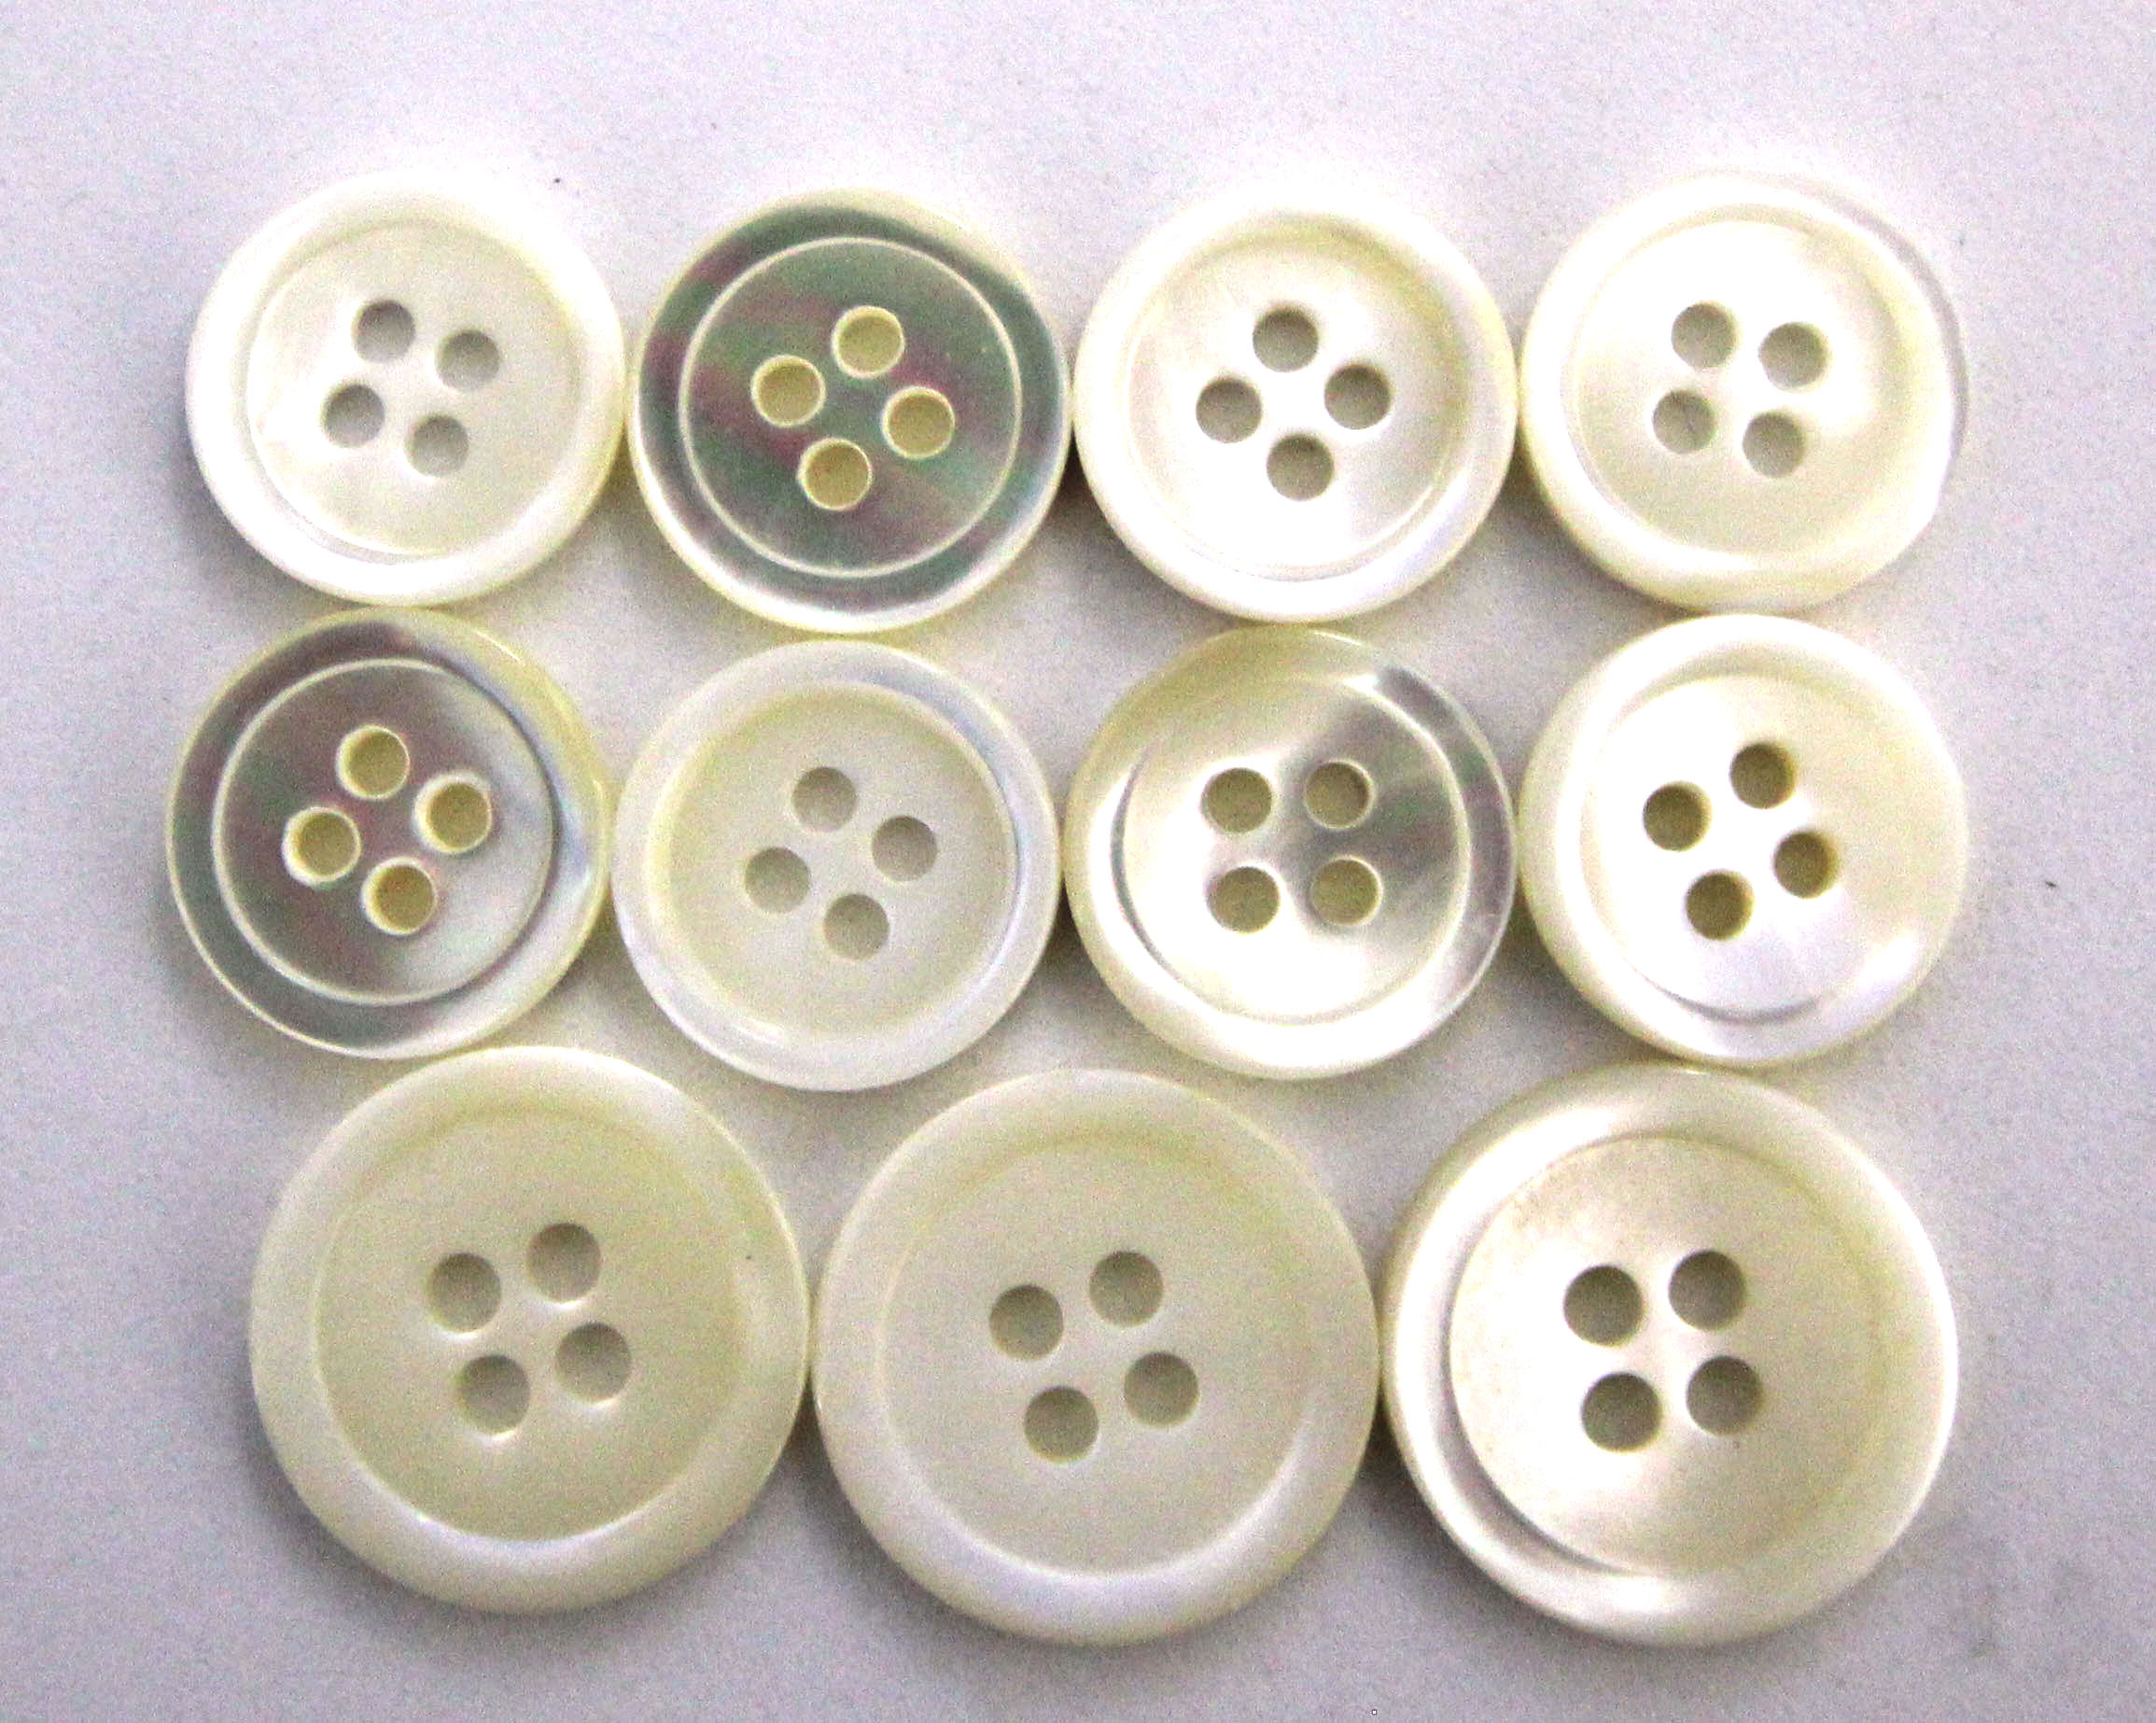 Mother of pearl 4 hole rimmed buttons